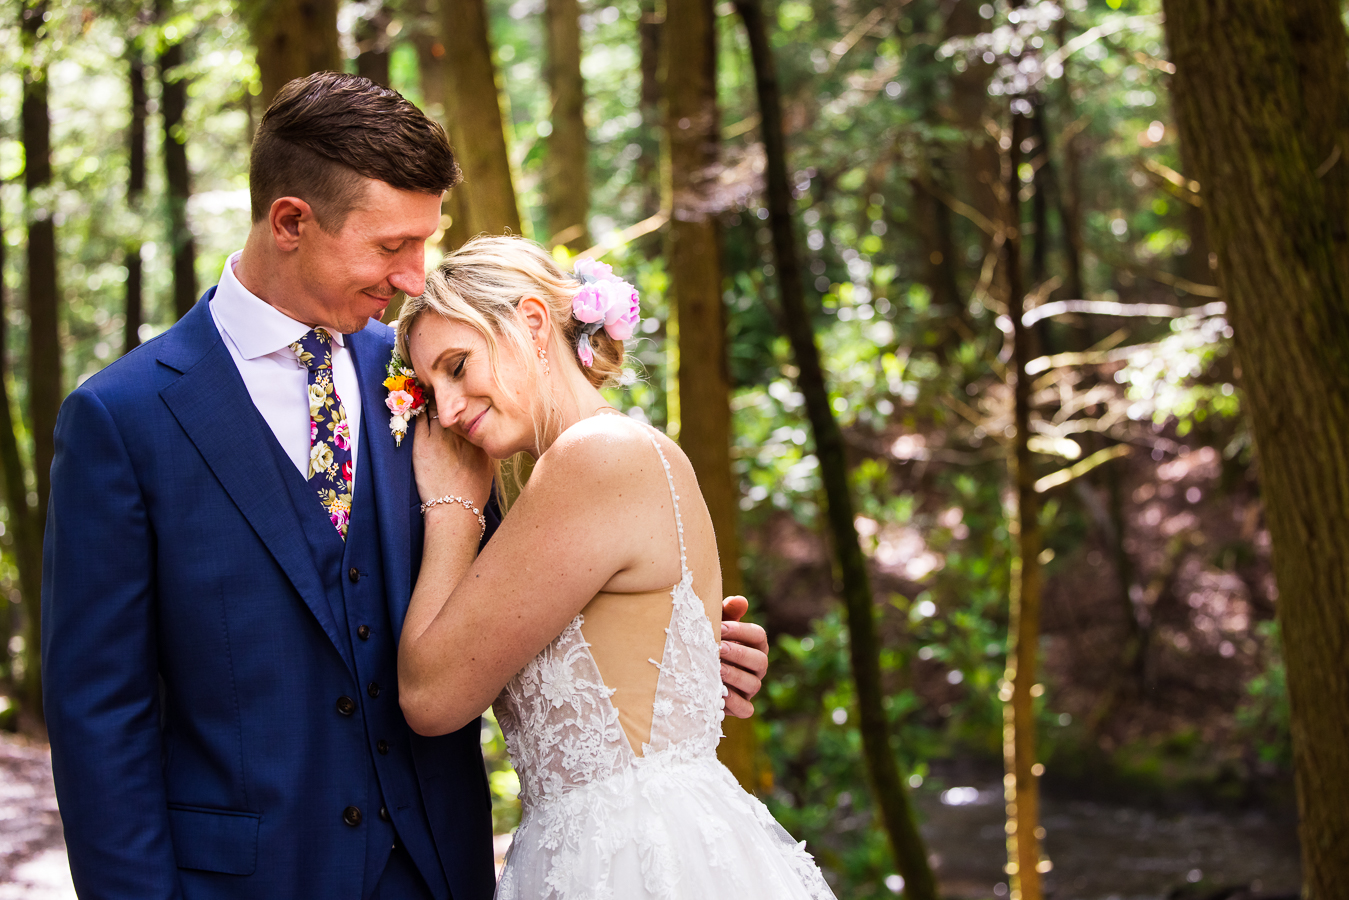 Jim Thorpe Wedding Photographer, lisa rhinehart, captures this vibrant, authentic, loving image of the bride and groom hugging one another and smiling as they stand beneath the trees in this pa hiking trail